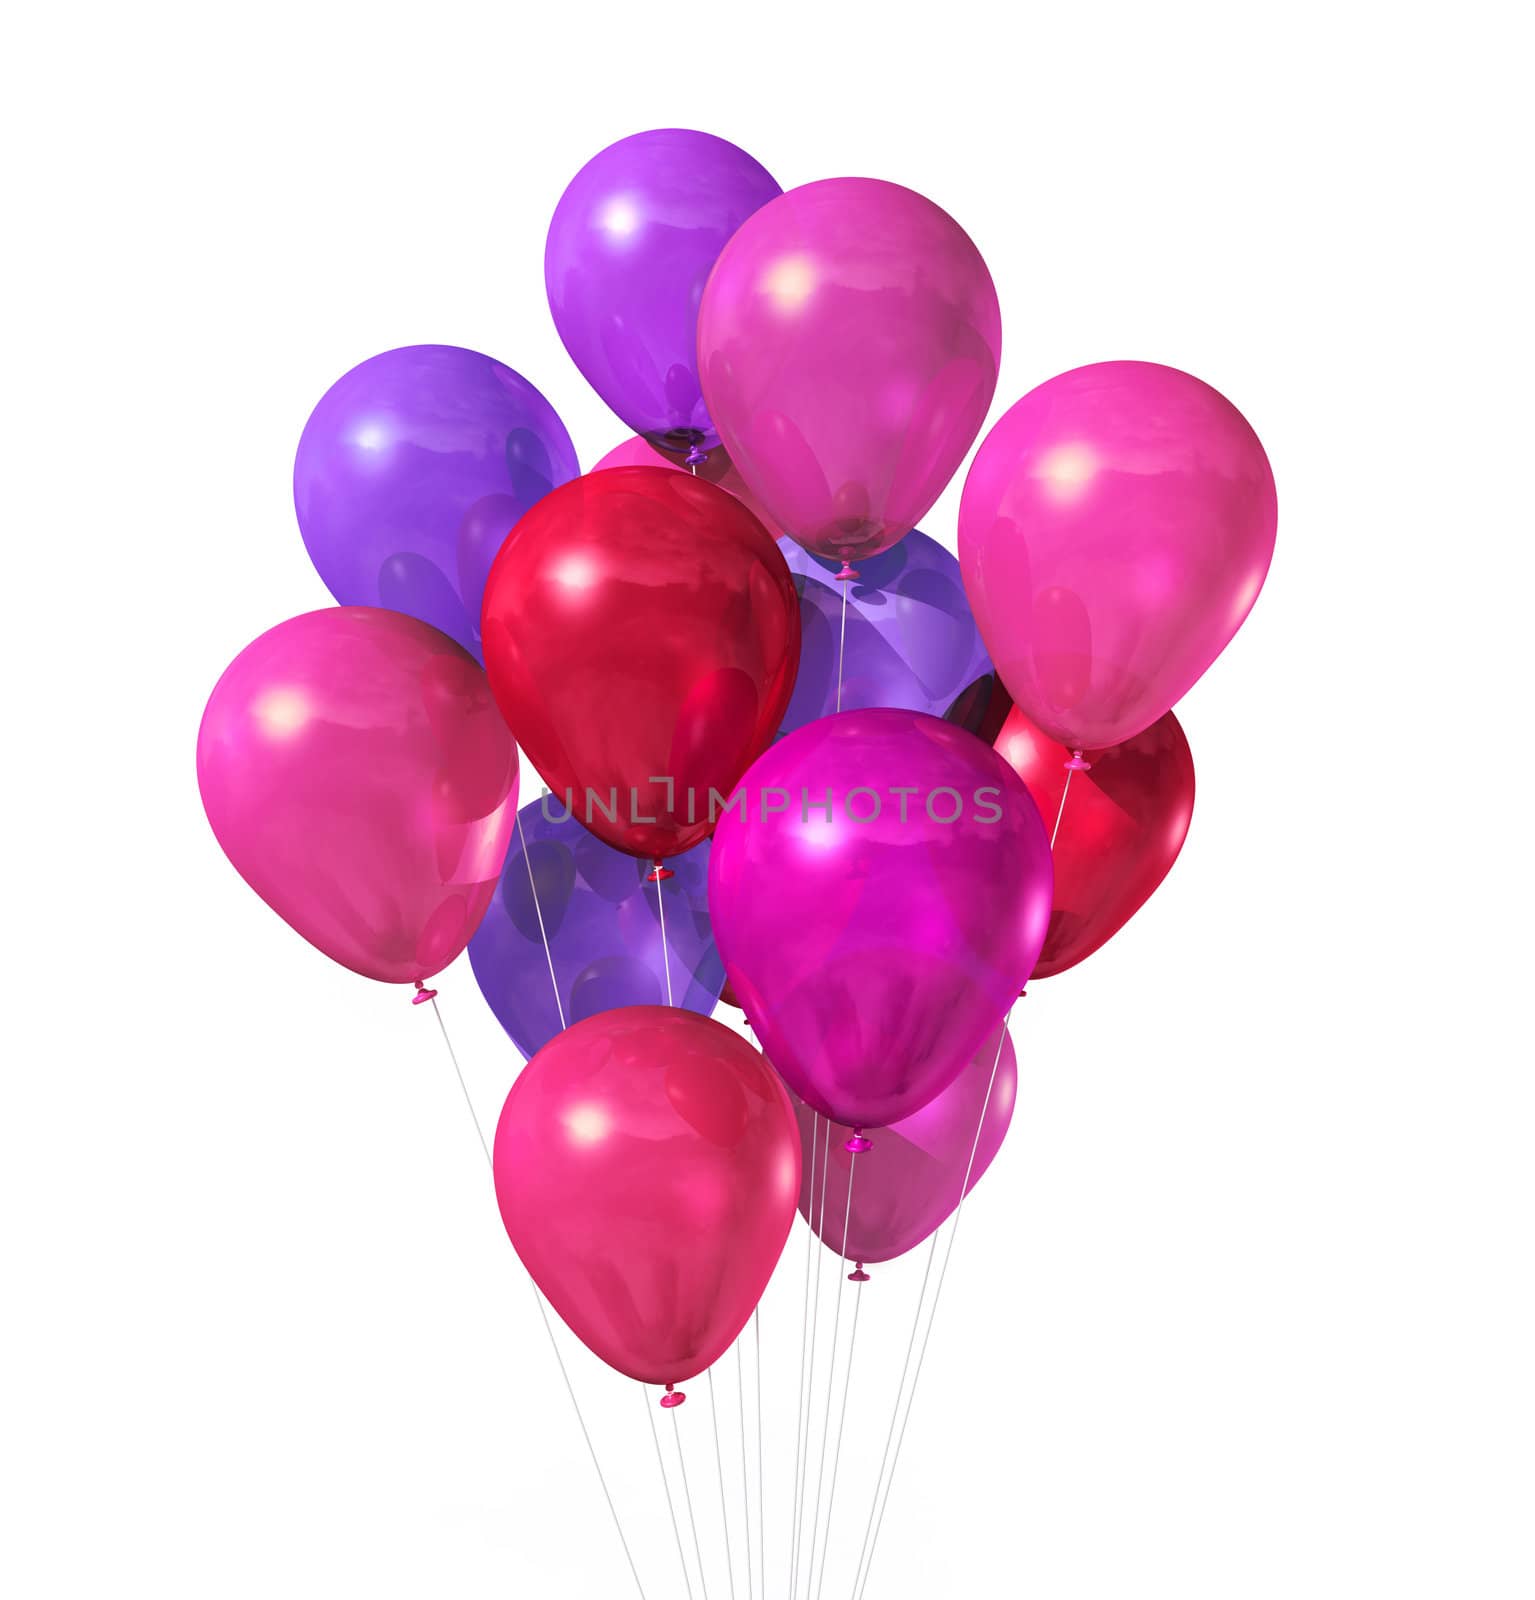 pink balloons group isolated on white by daboost